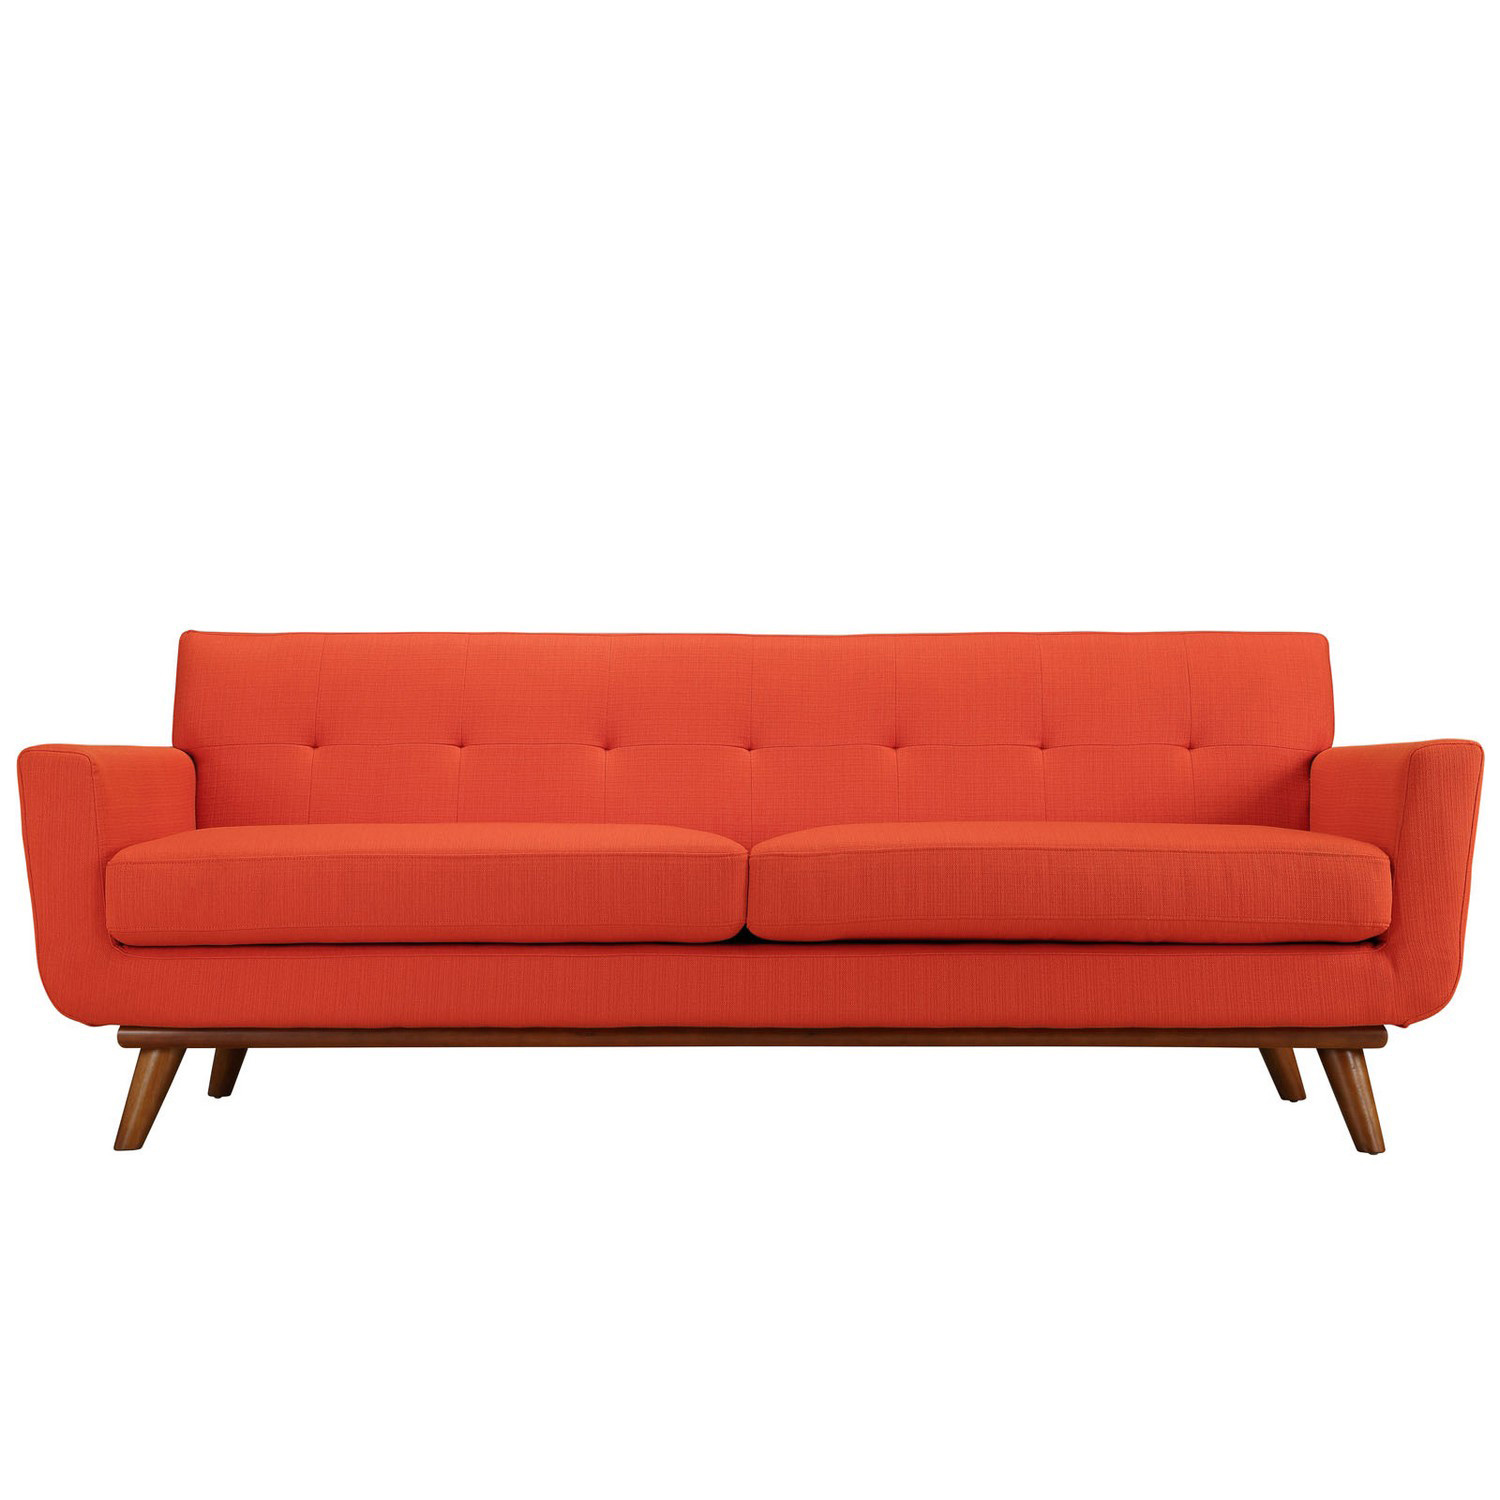 Modway Engage Upholstered Sofa - Atomic Red